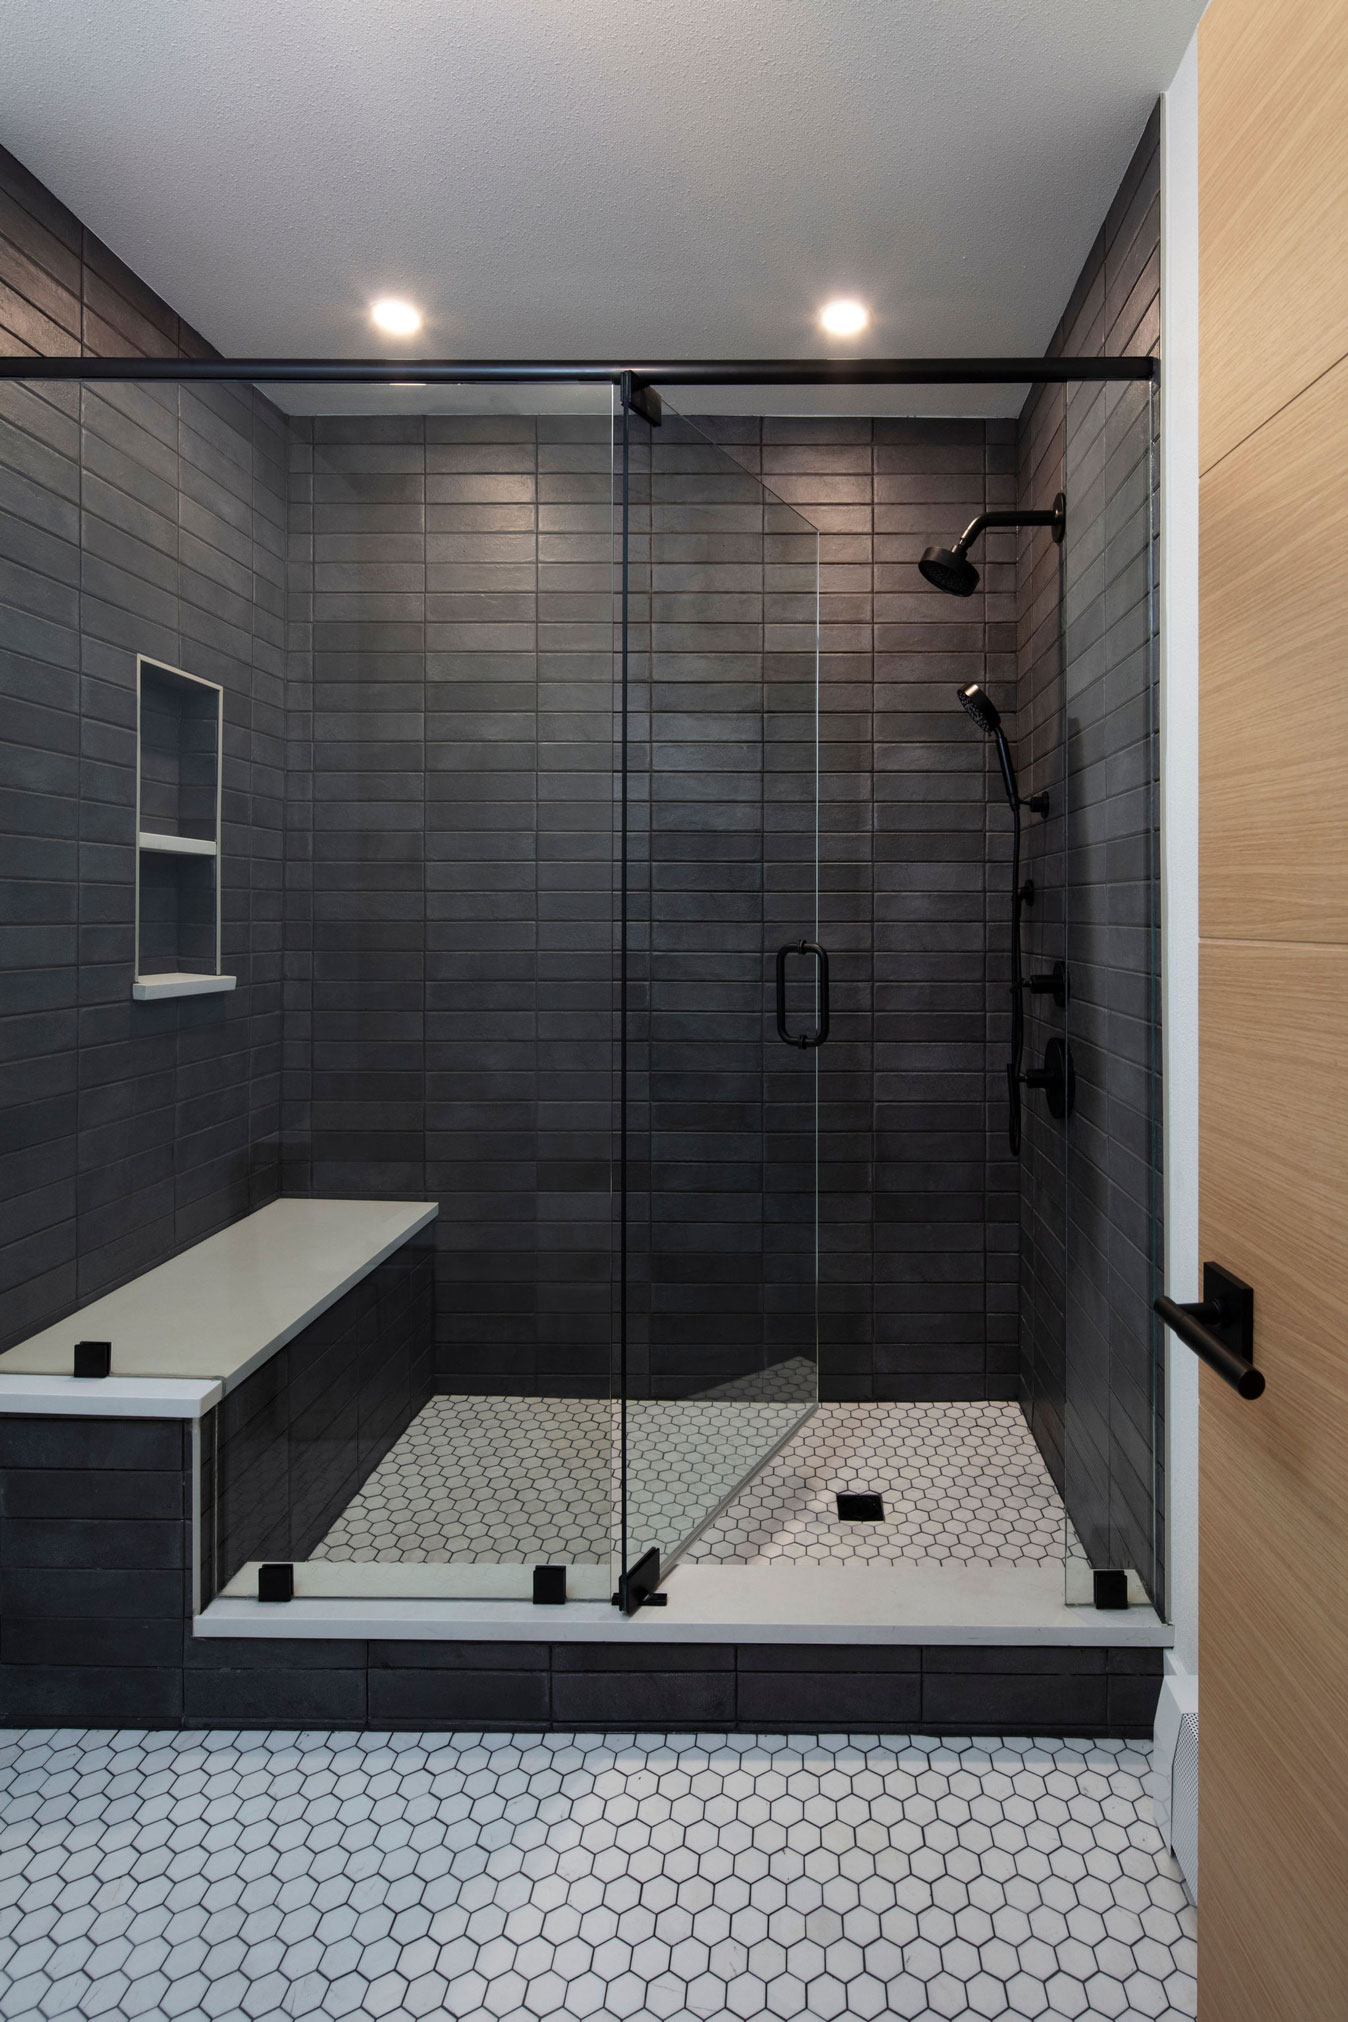 Wildflower custom home - walk-in glass shower with hexagonal floor tile and matte subway tile on the walls